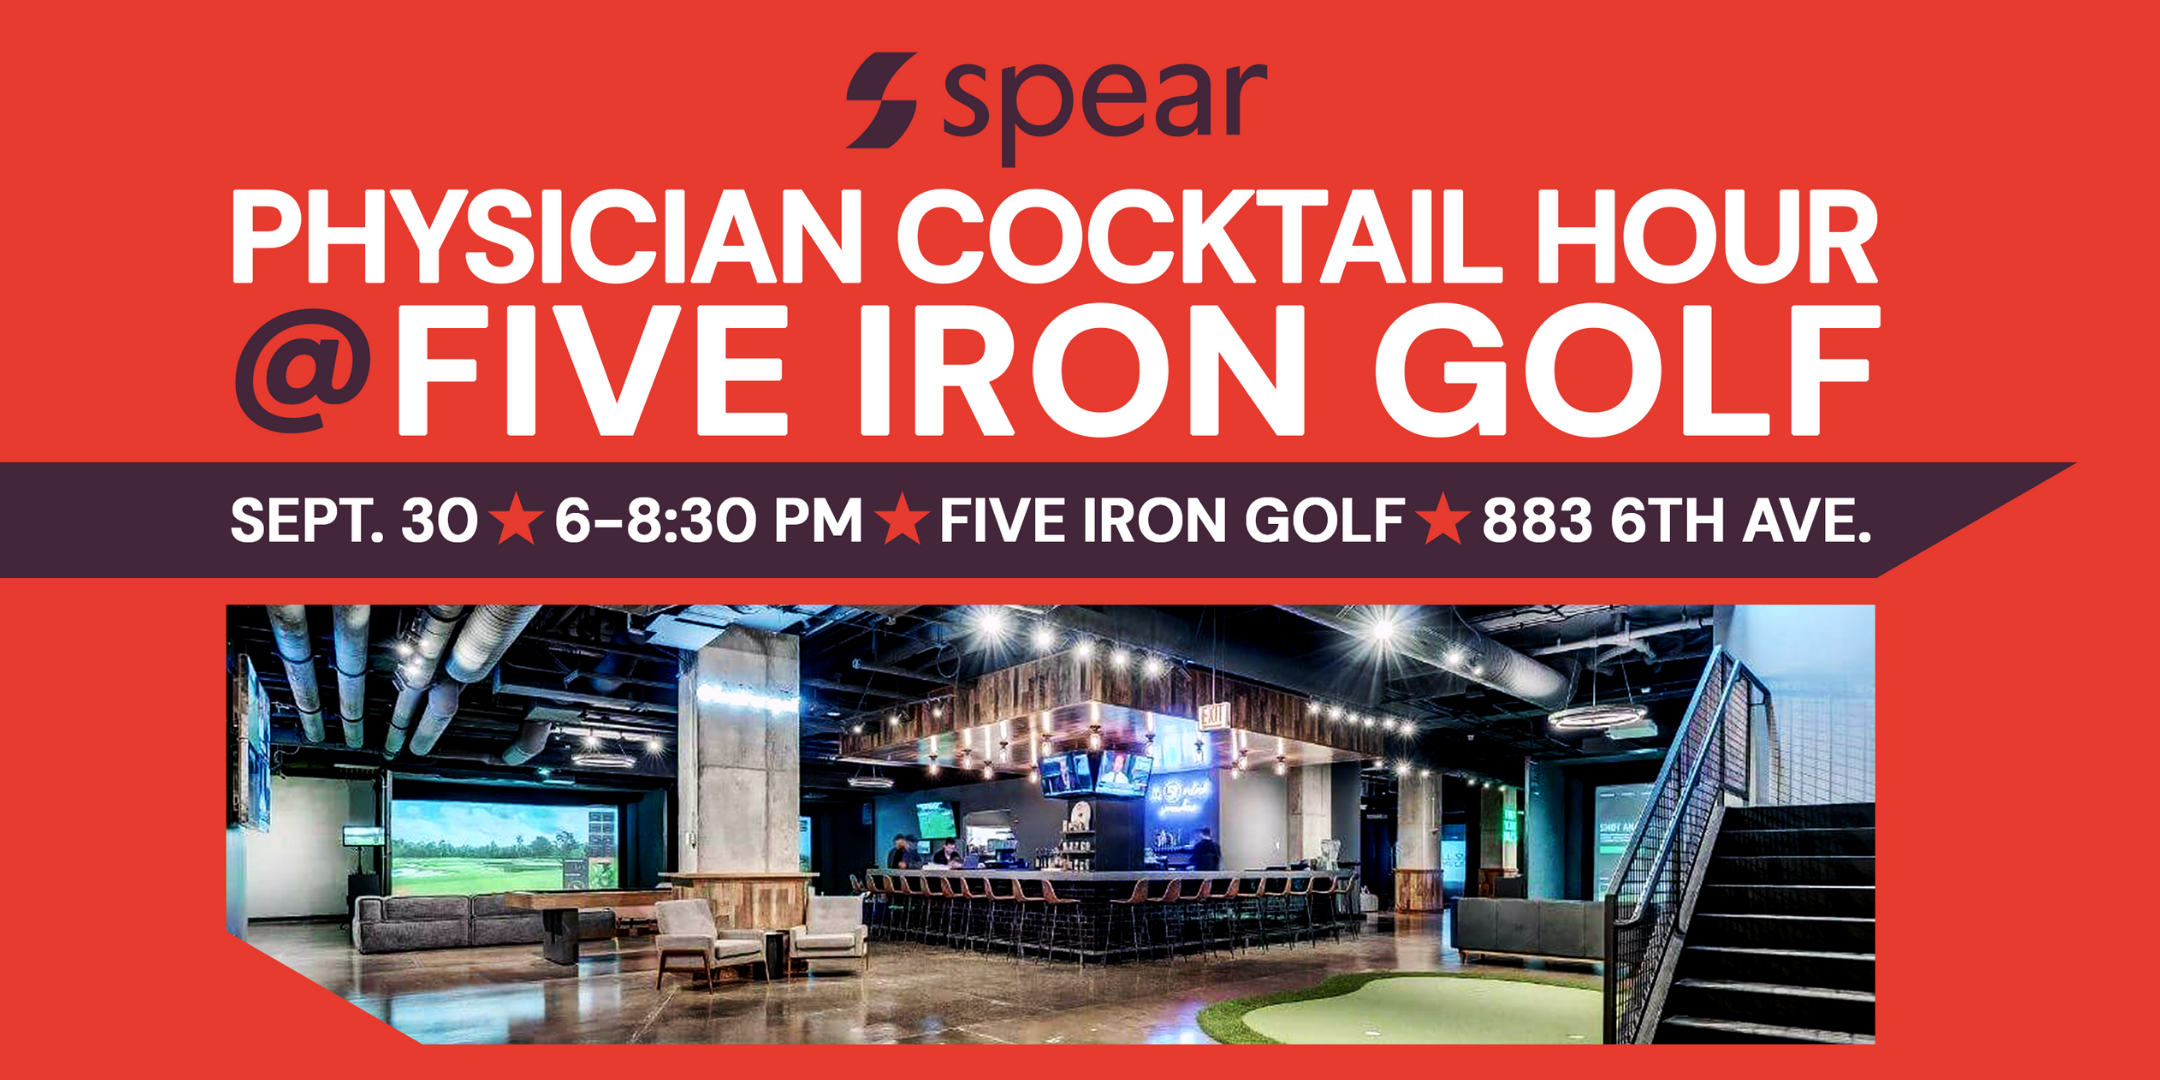 Physician Cocktail Hour @ 5-Iron Golf